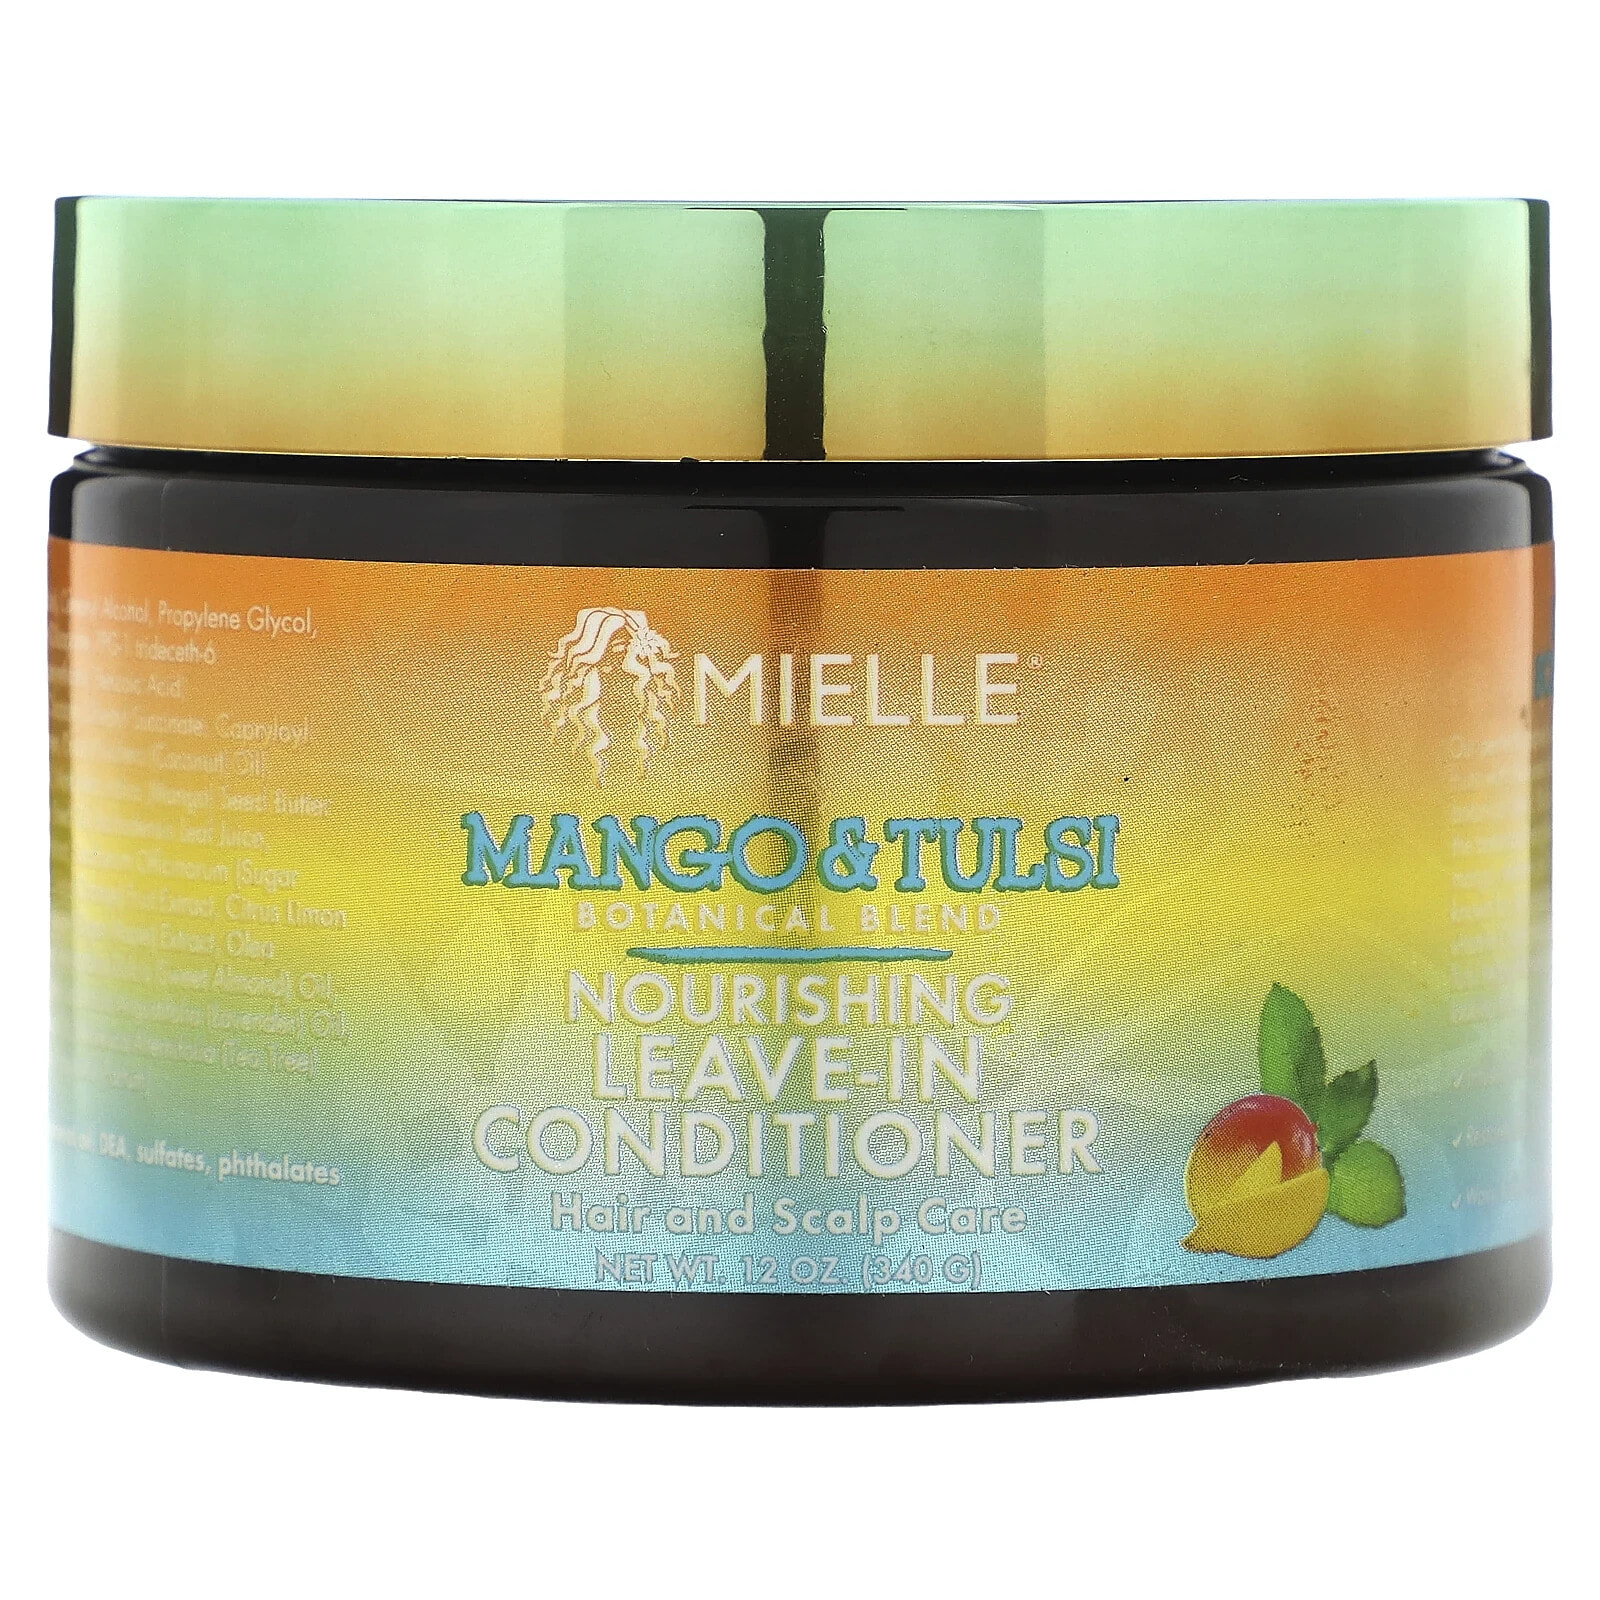 Mielle, Nourishing Leave-In Conditioner, Mango & Tulsi, Botanical Blend, 12 oz (340 g)